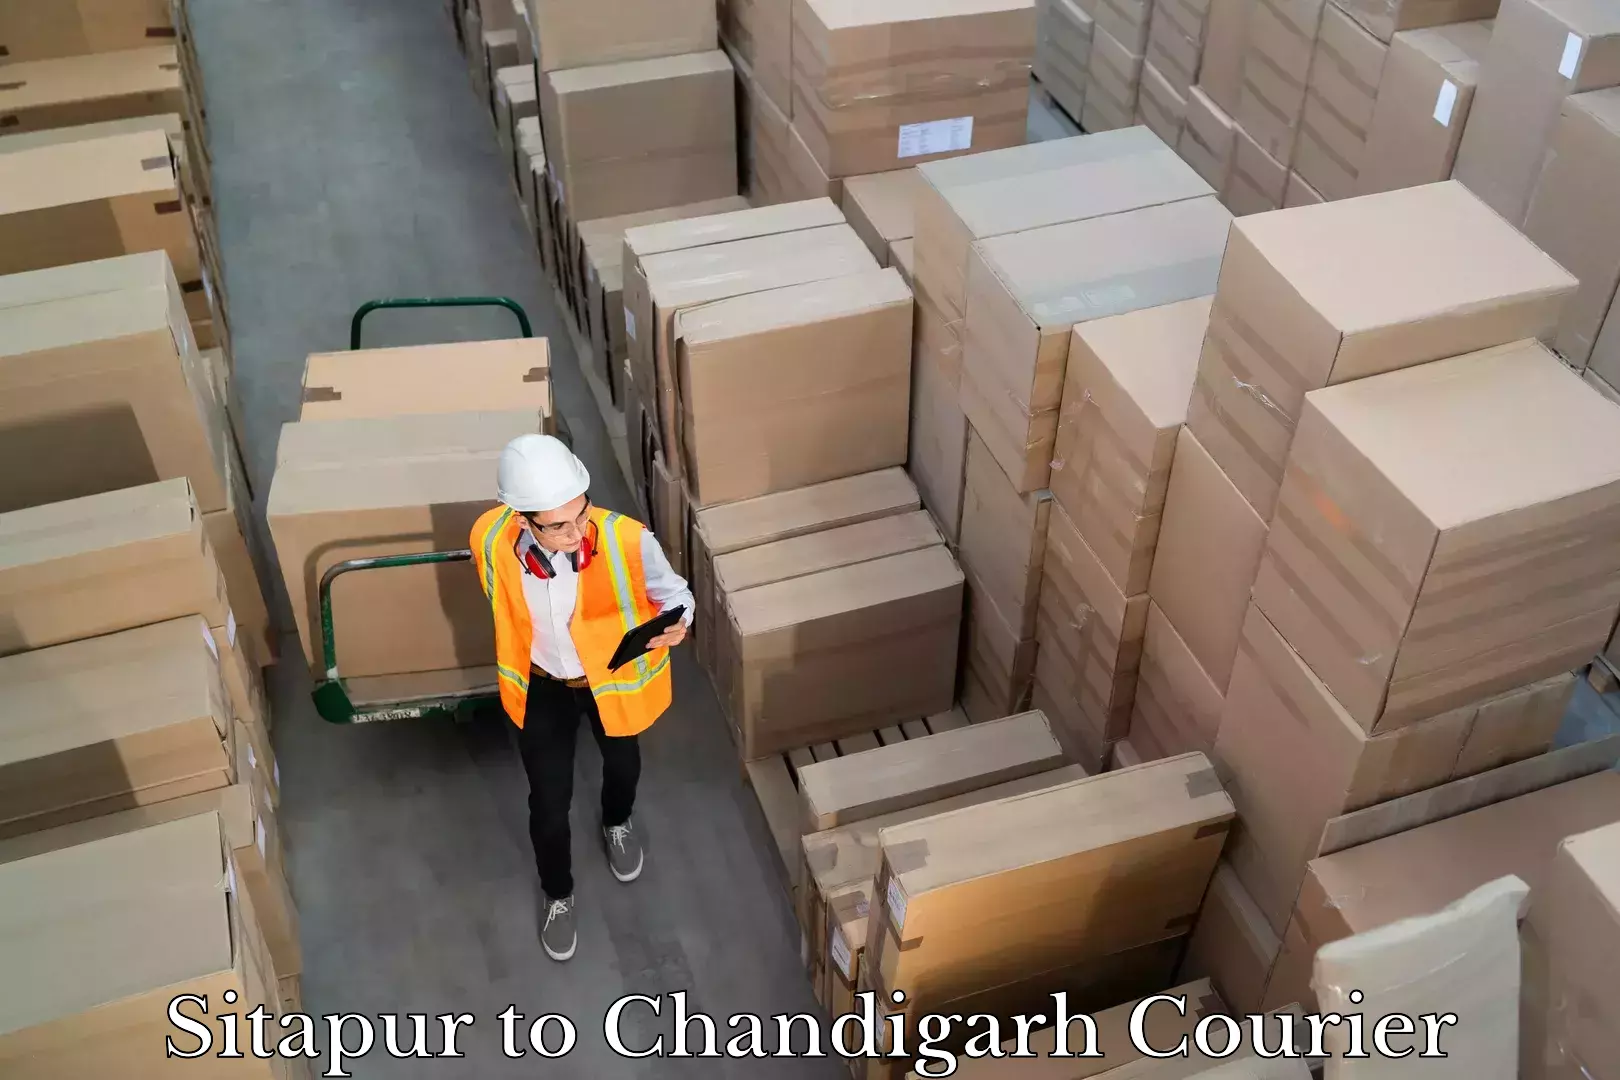 Global courier networks Sitapur to Chandigarh